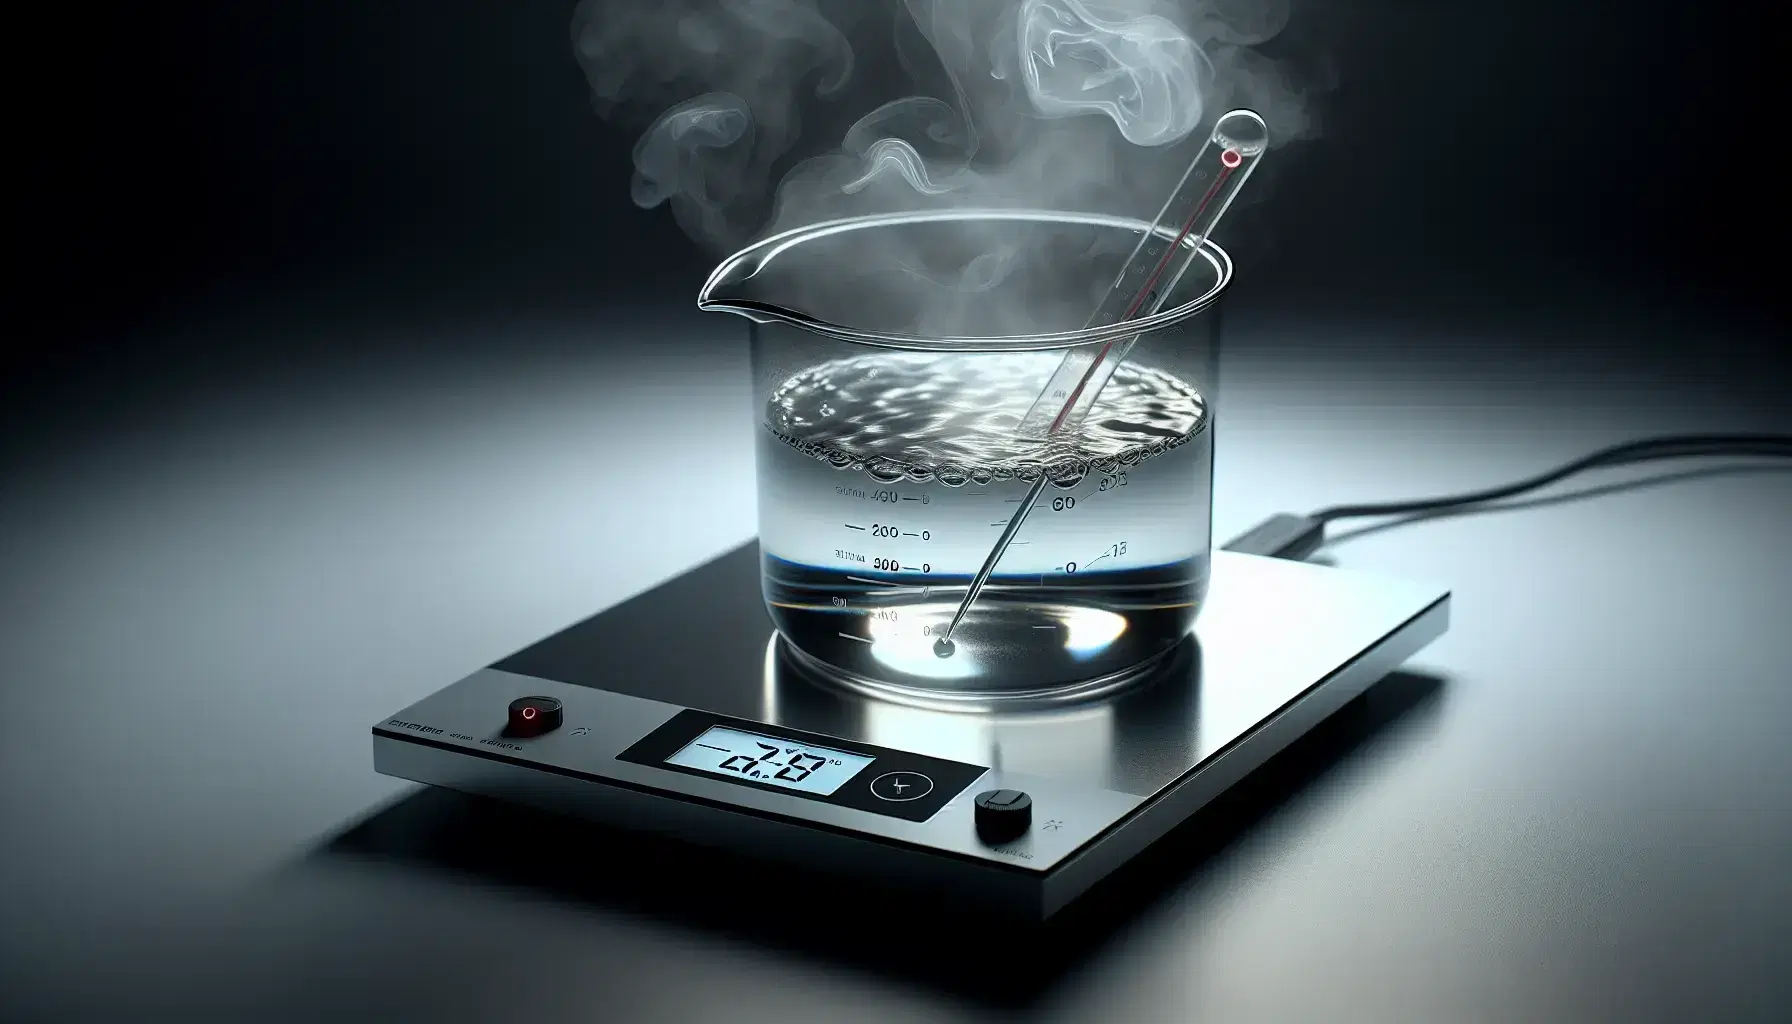 Glass beaker with clear liquid on digital hotplate, steam visible above, immersed thermometer, neutral gray background.